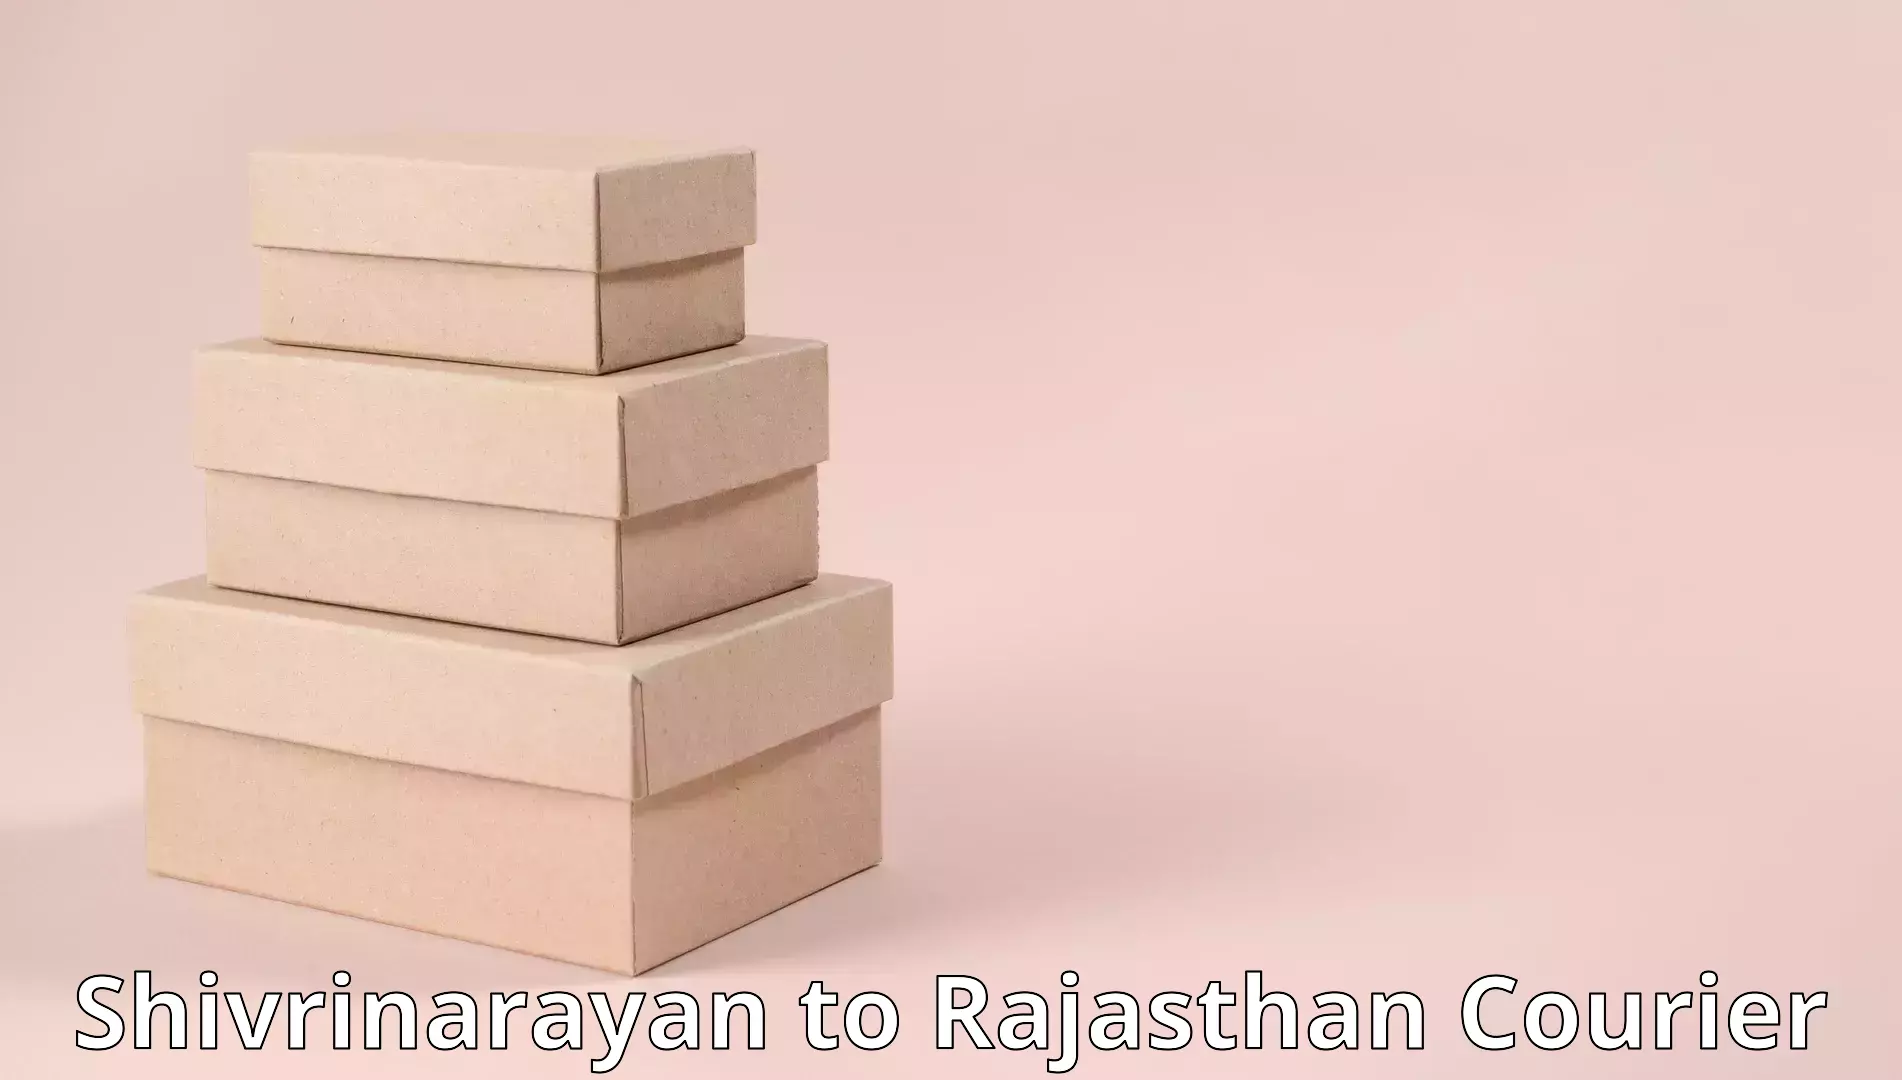 Comprehensive relocation services Shivrinarayan to Yeswanthapur